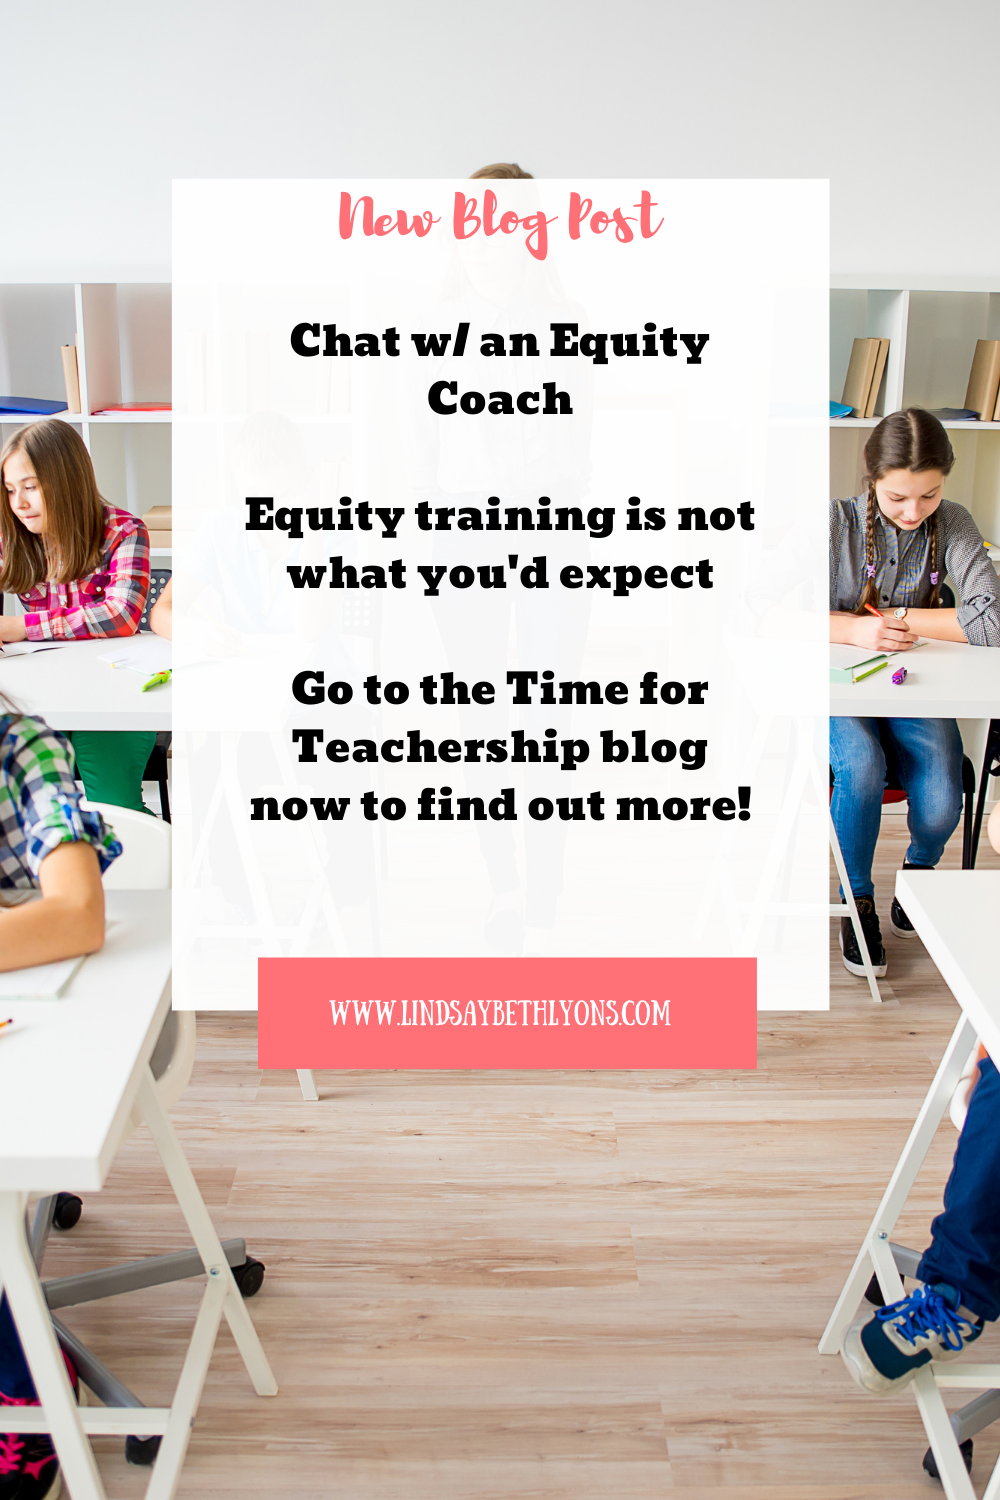 Right now, the need for equity training at schools is getting higher, not lower. It’s apparent that teachers still haven’t built the capacity or habit of doing the work on their own. According to today's guest, Dr. Eakins, the goal is for school members to get all the tools they need to take charge of their own social justice efforts. Tune in to hear us talk about what equity training really involves and why teachers shouldn't assume they don't need it.